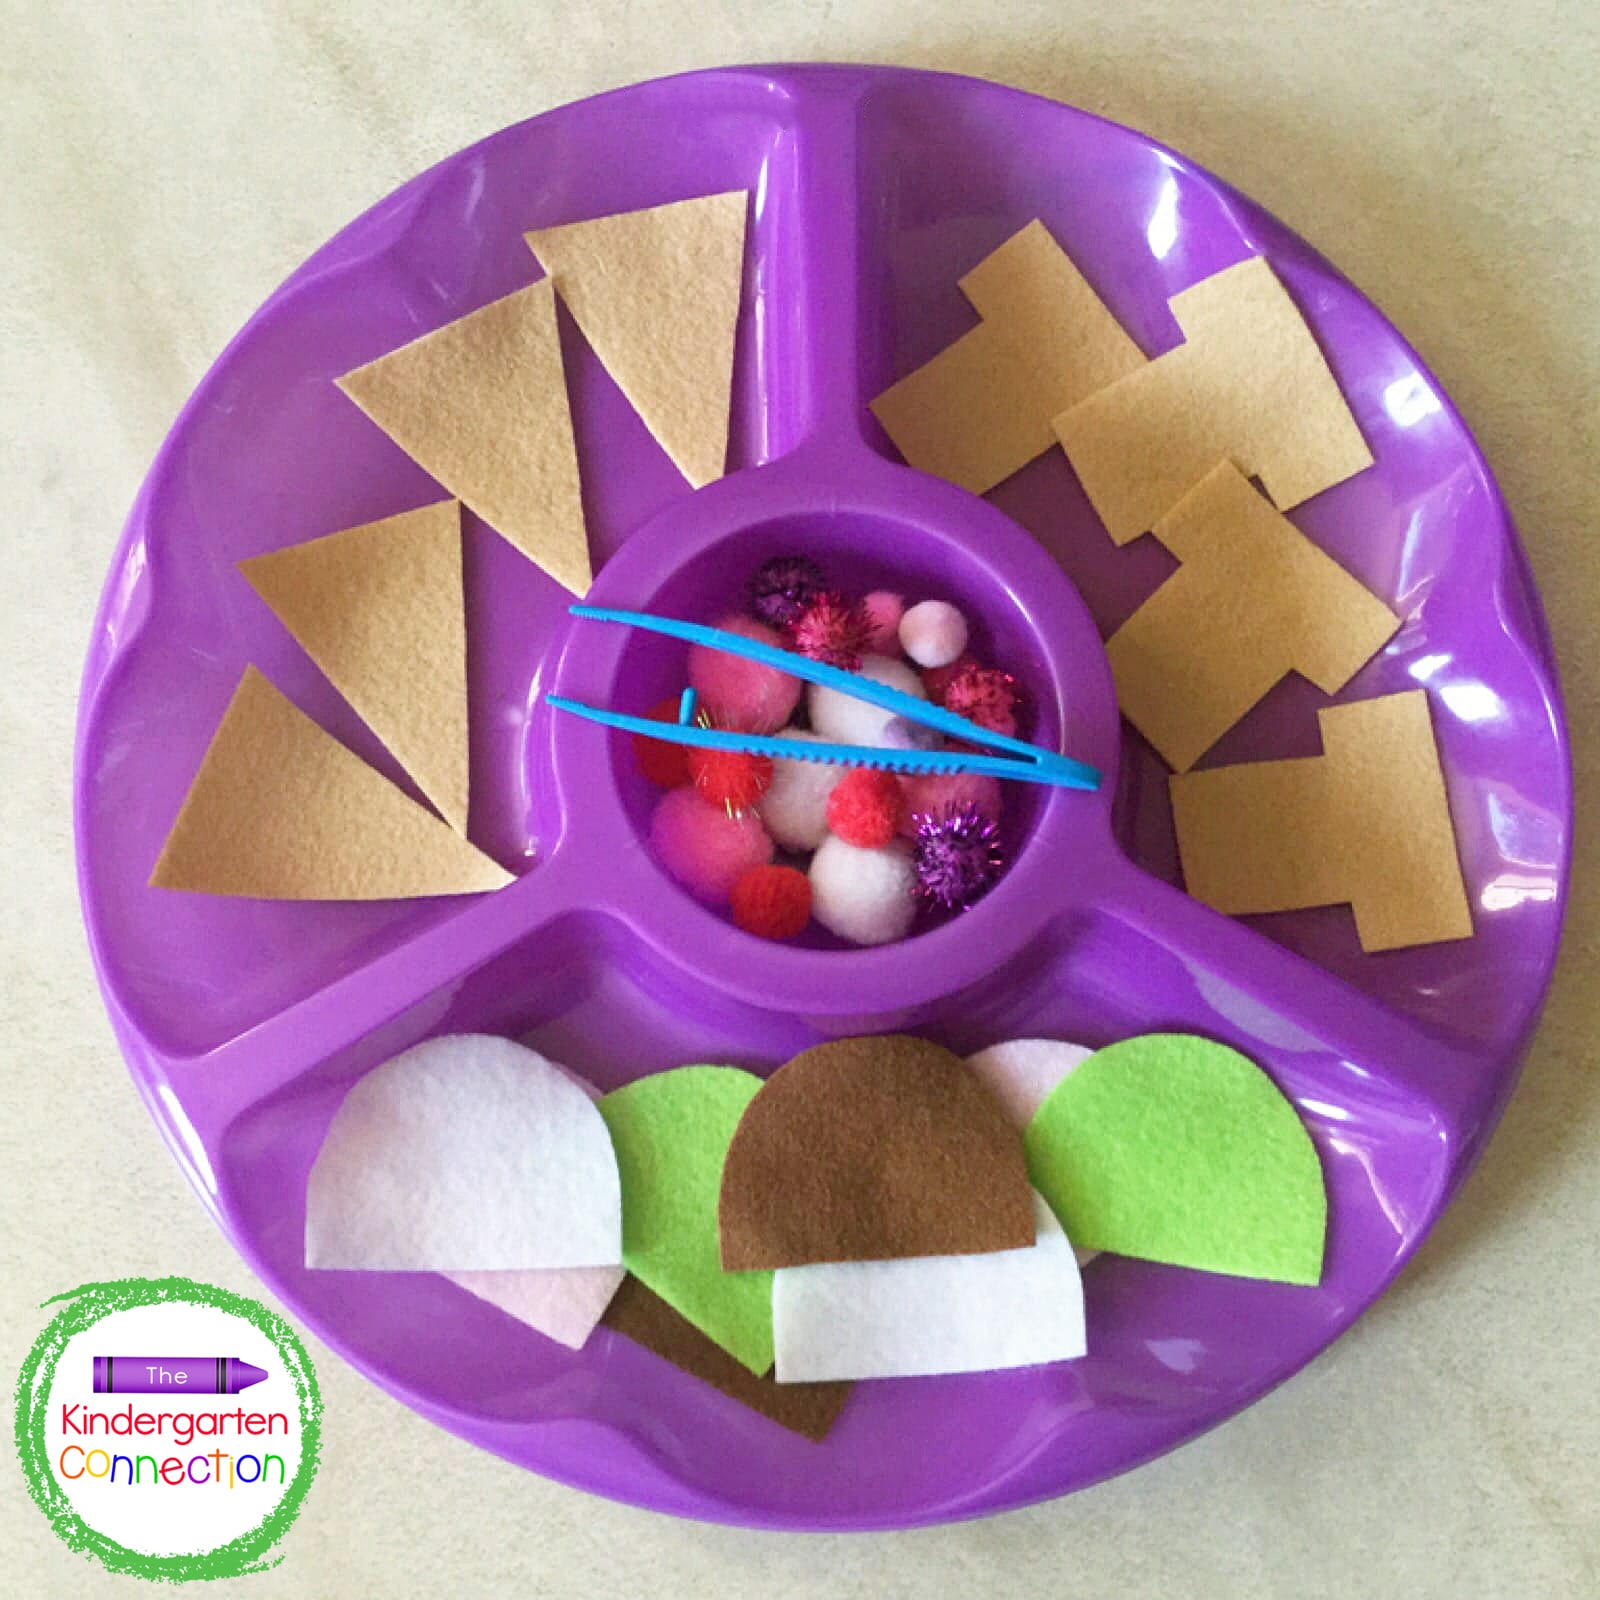 Add all of your ice cream scoop supplies to a fun tray to keep organized.